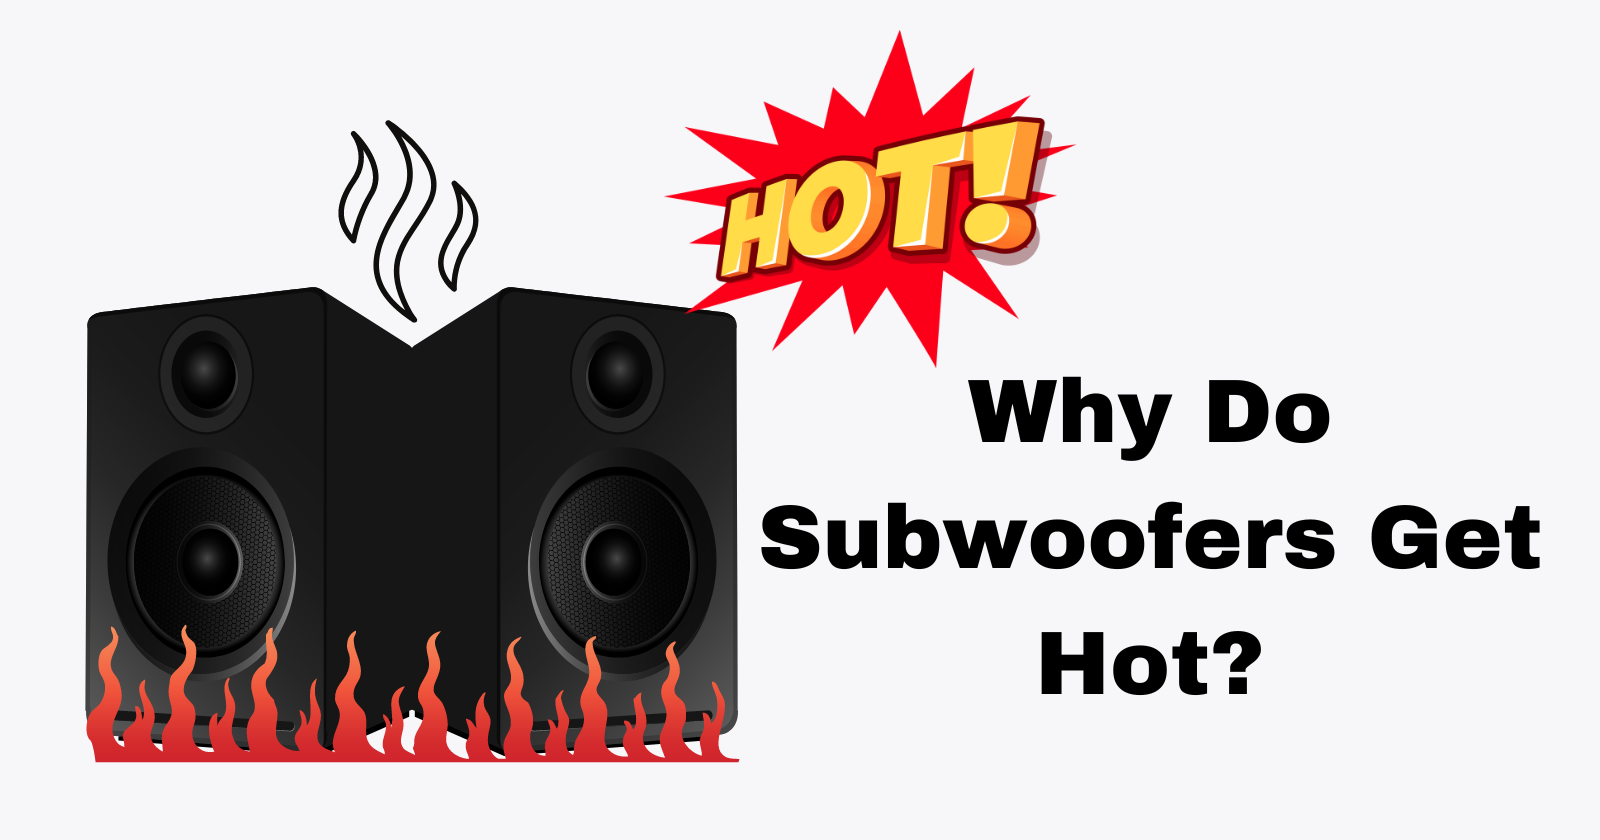 Why Do Subwoofers Get Hot